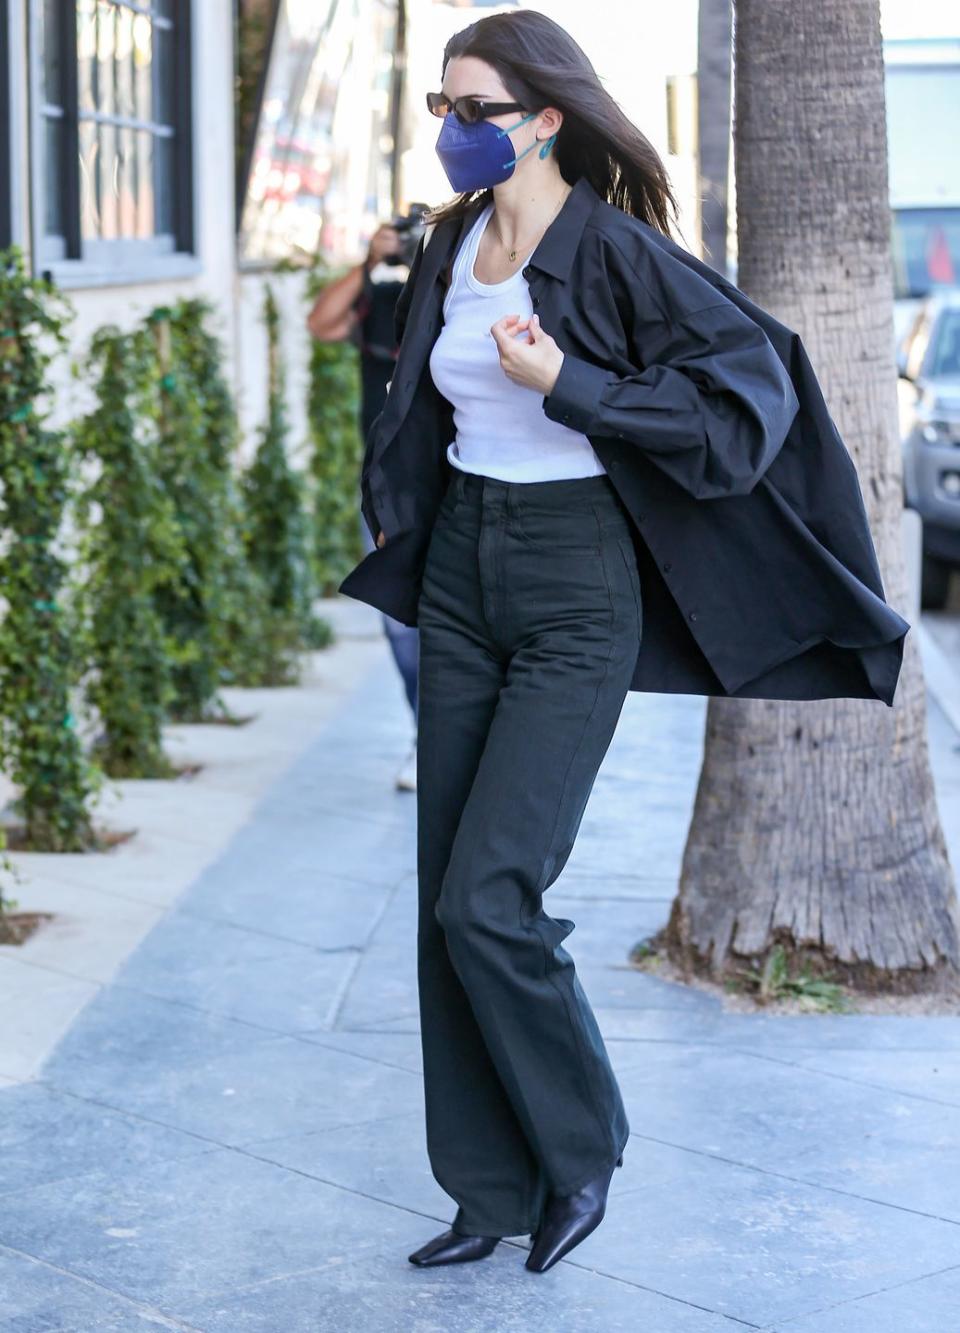 5) Kendall Jenner steps out in an oversized shirt, February 2022